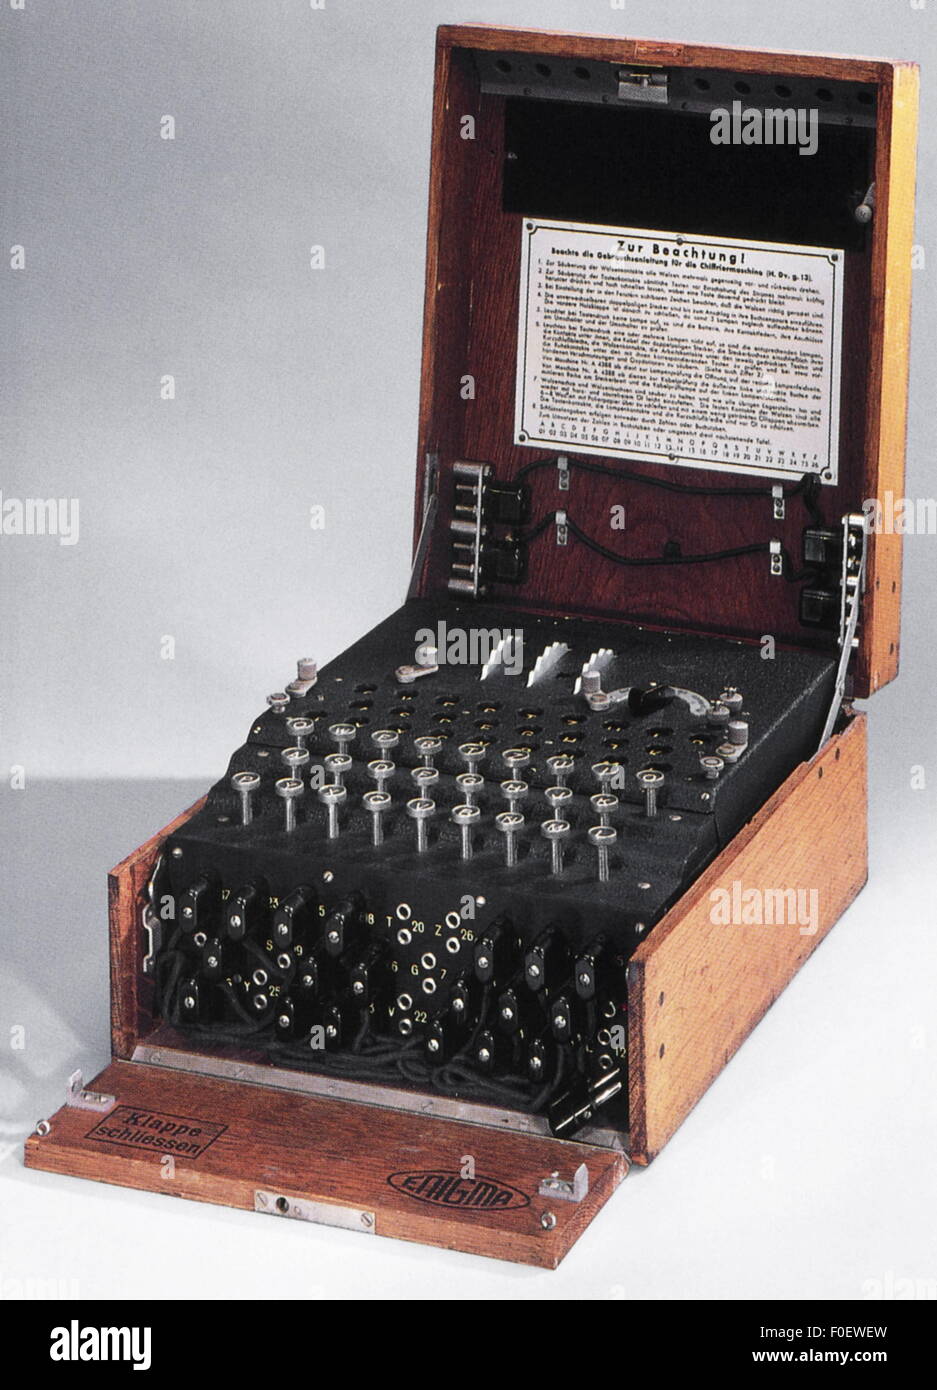 Espionage German Enigma Machine Used For The Encryption And Decryption Of Secret Message In Service 1923 1945 Additional Rights Clearences Not Available Stock Photo Alamy